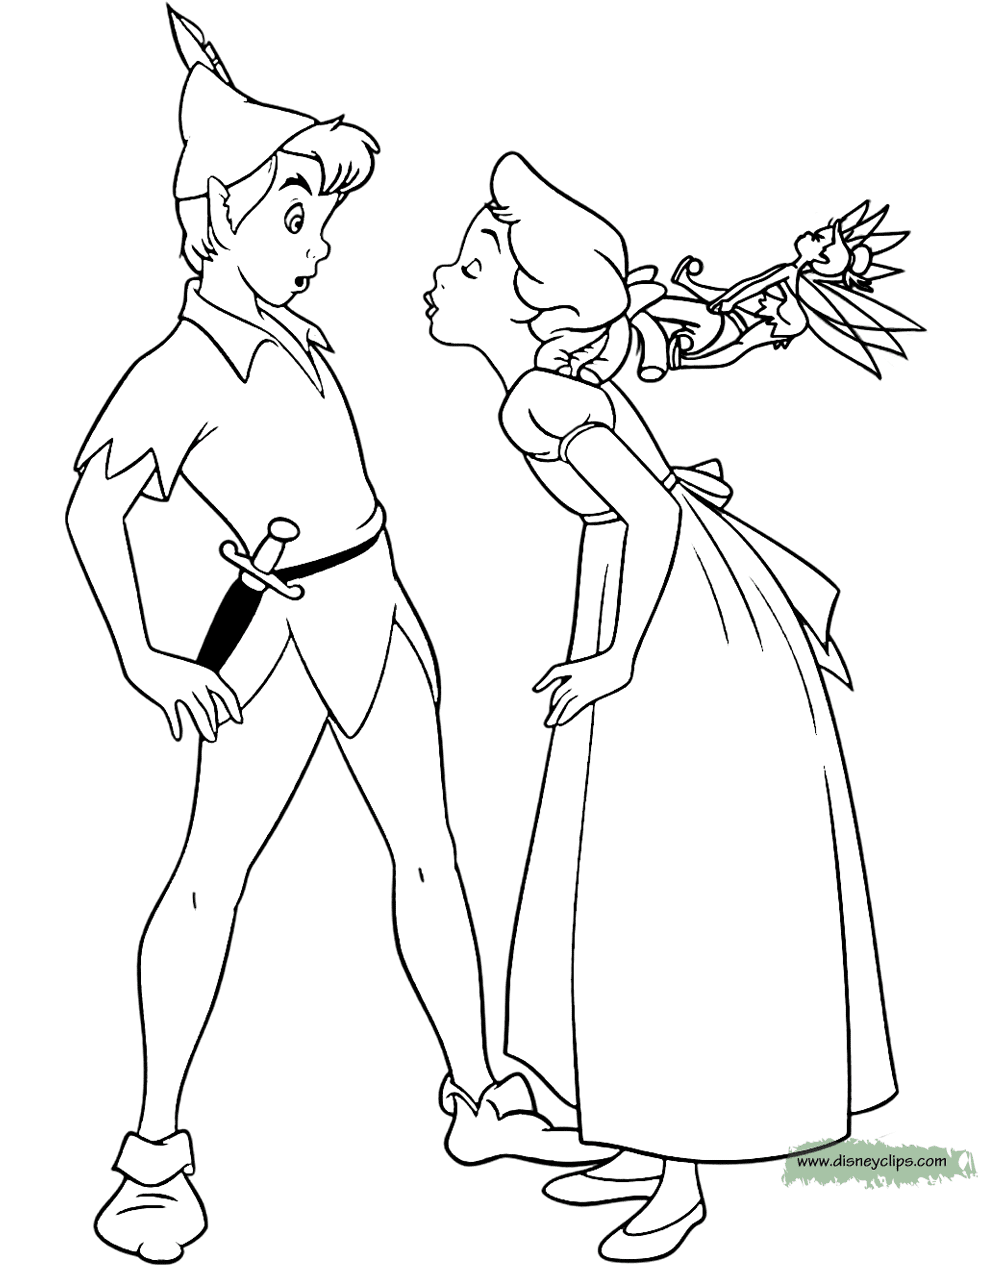 peter pan coloring pages free free printable peter pan coloring pages for kids pan coloring free pages peter 